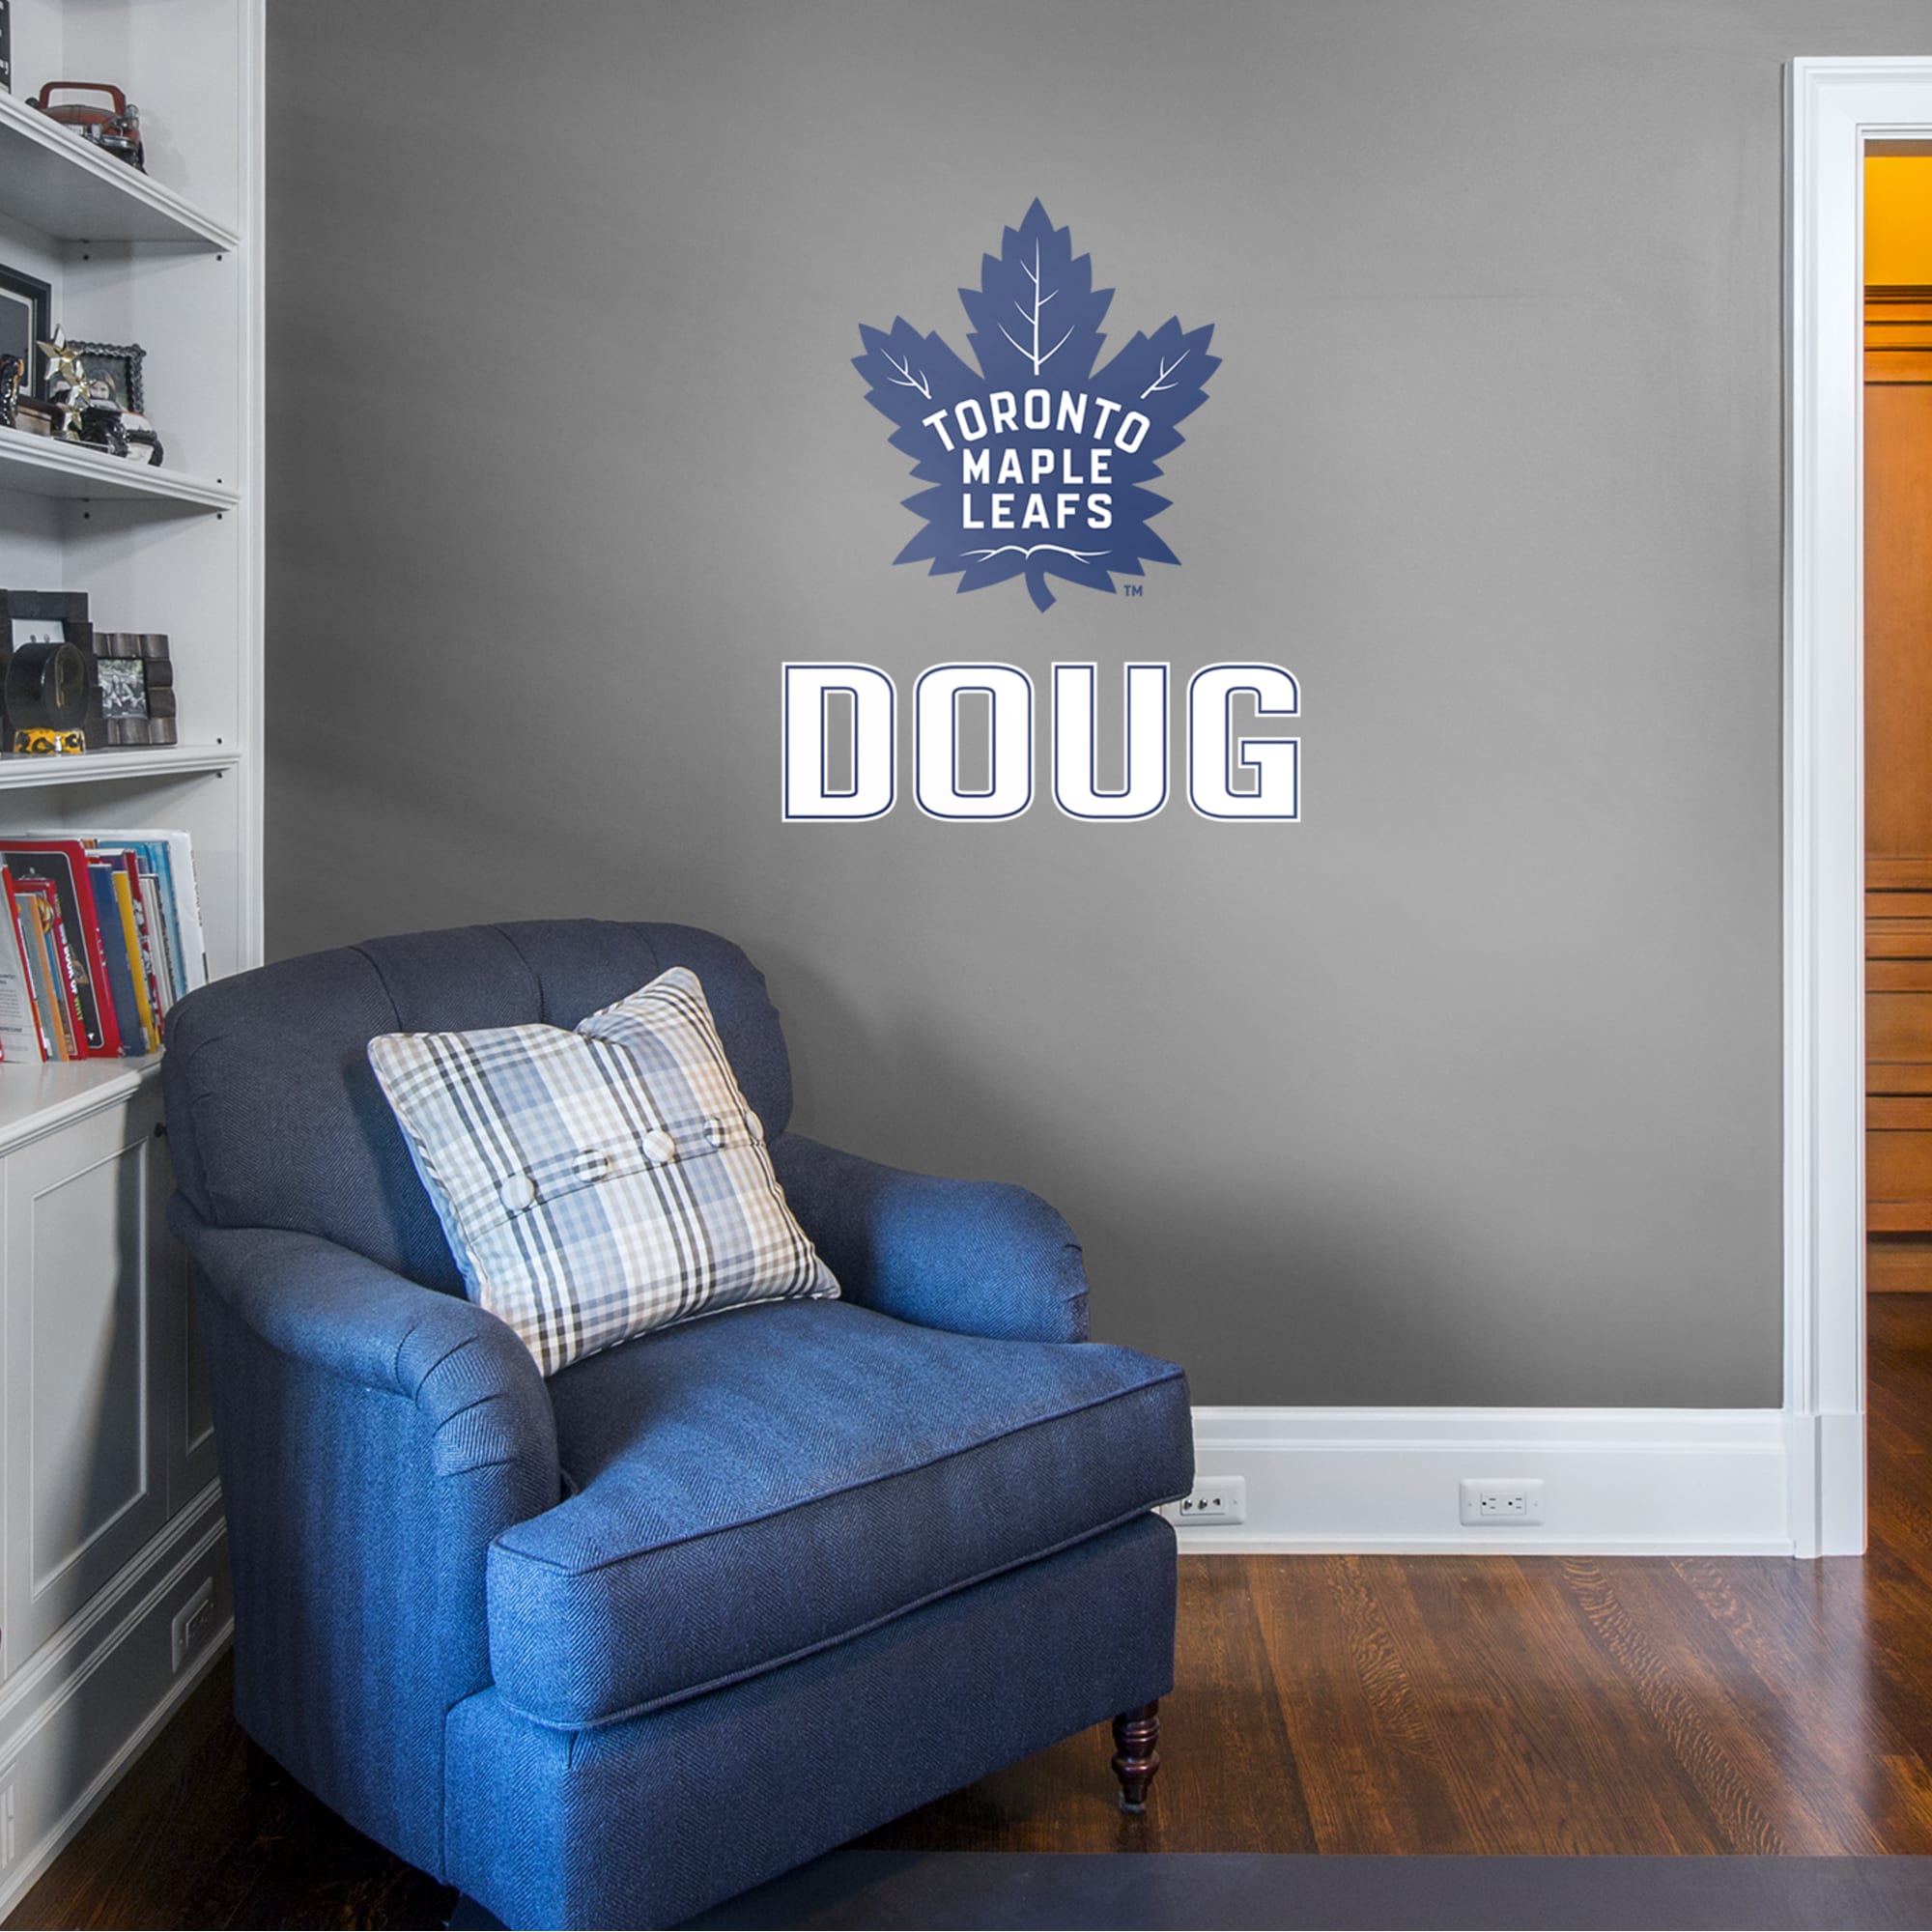 Toronto Maple Leafs: Stacked Personalized Name - Officially Licensed NHL Transfer Decal in Blue/White (39.5"W x 52"H) by Fathead